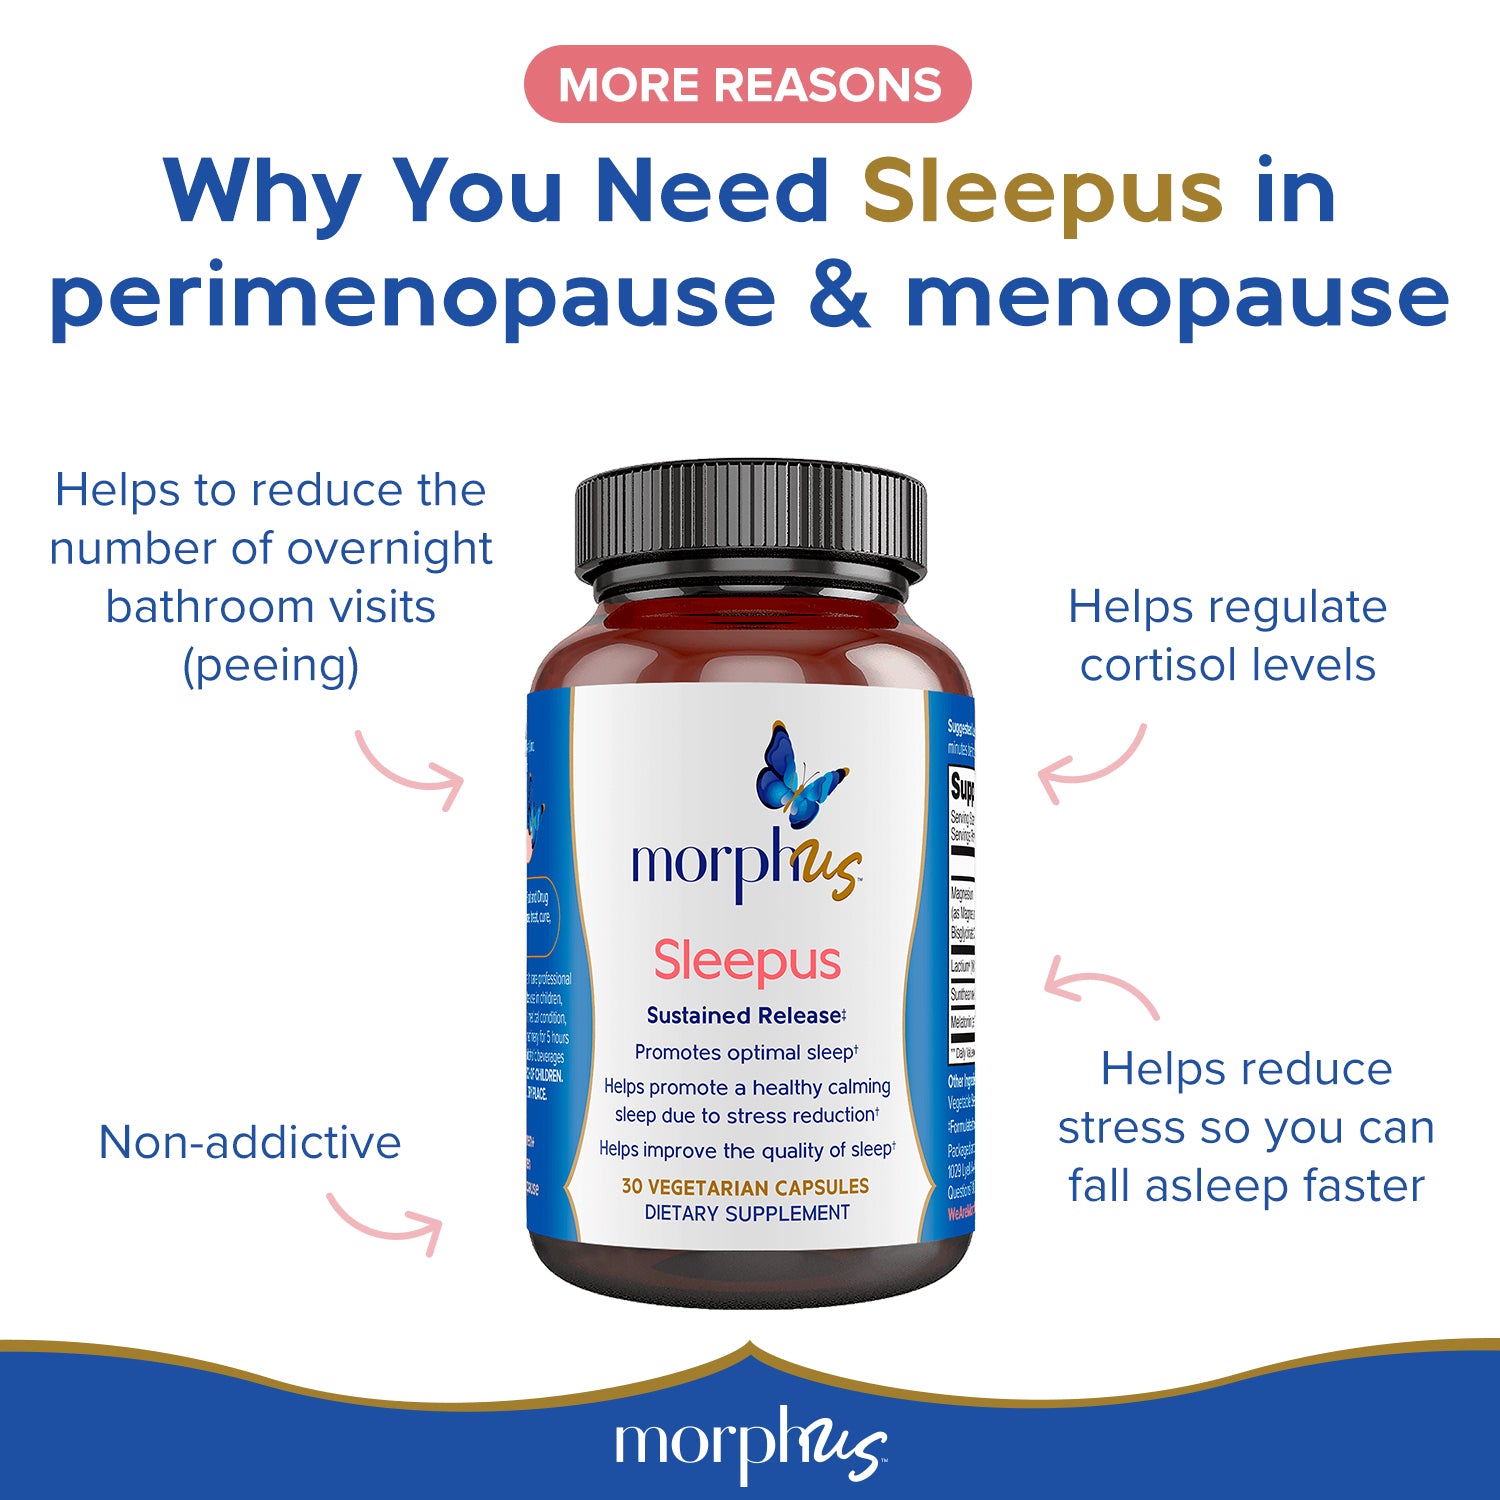 more reasons why you need morphus sleepus for better sleep in perimenopause and menopause